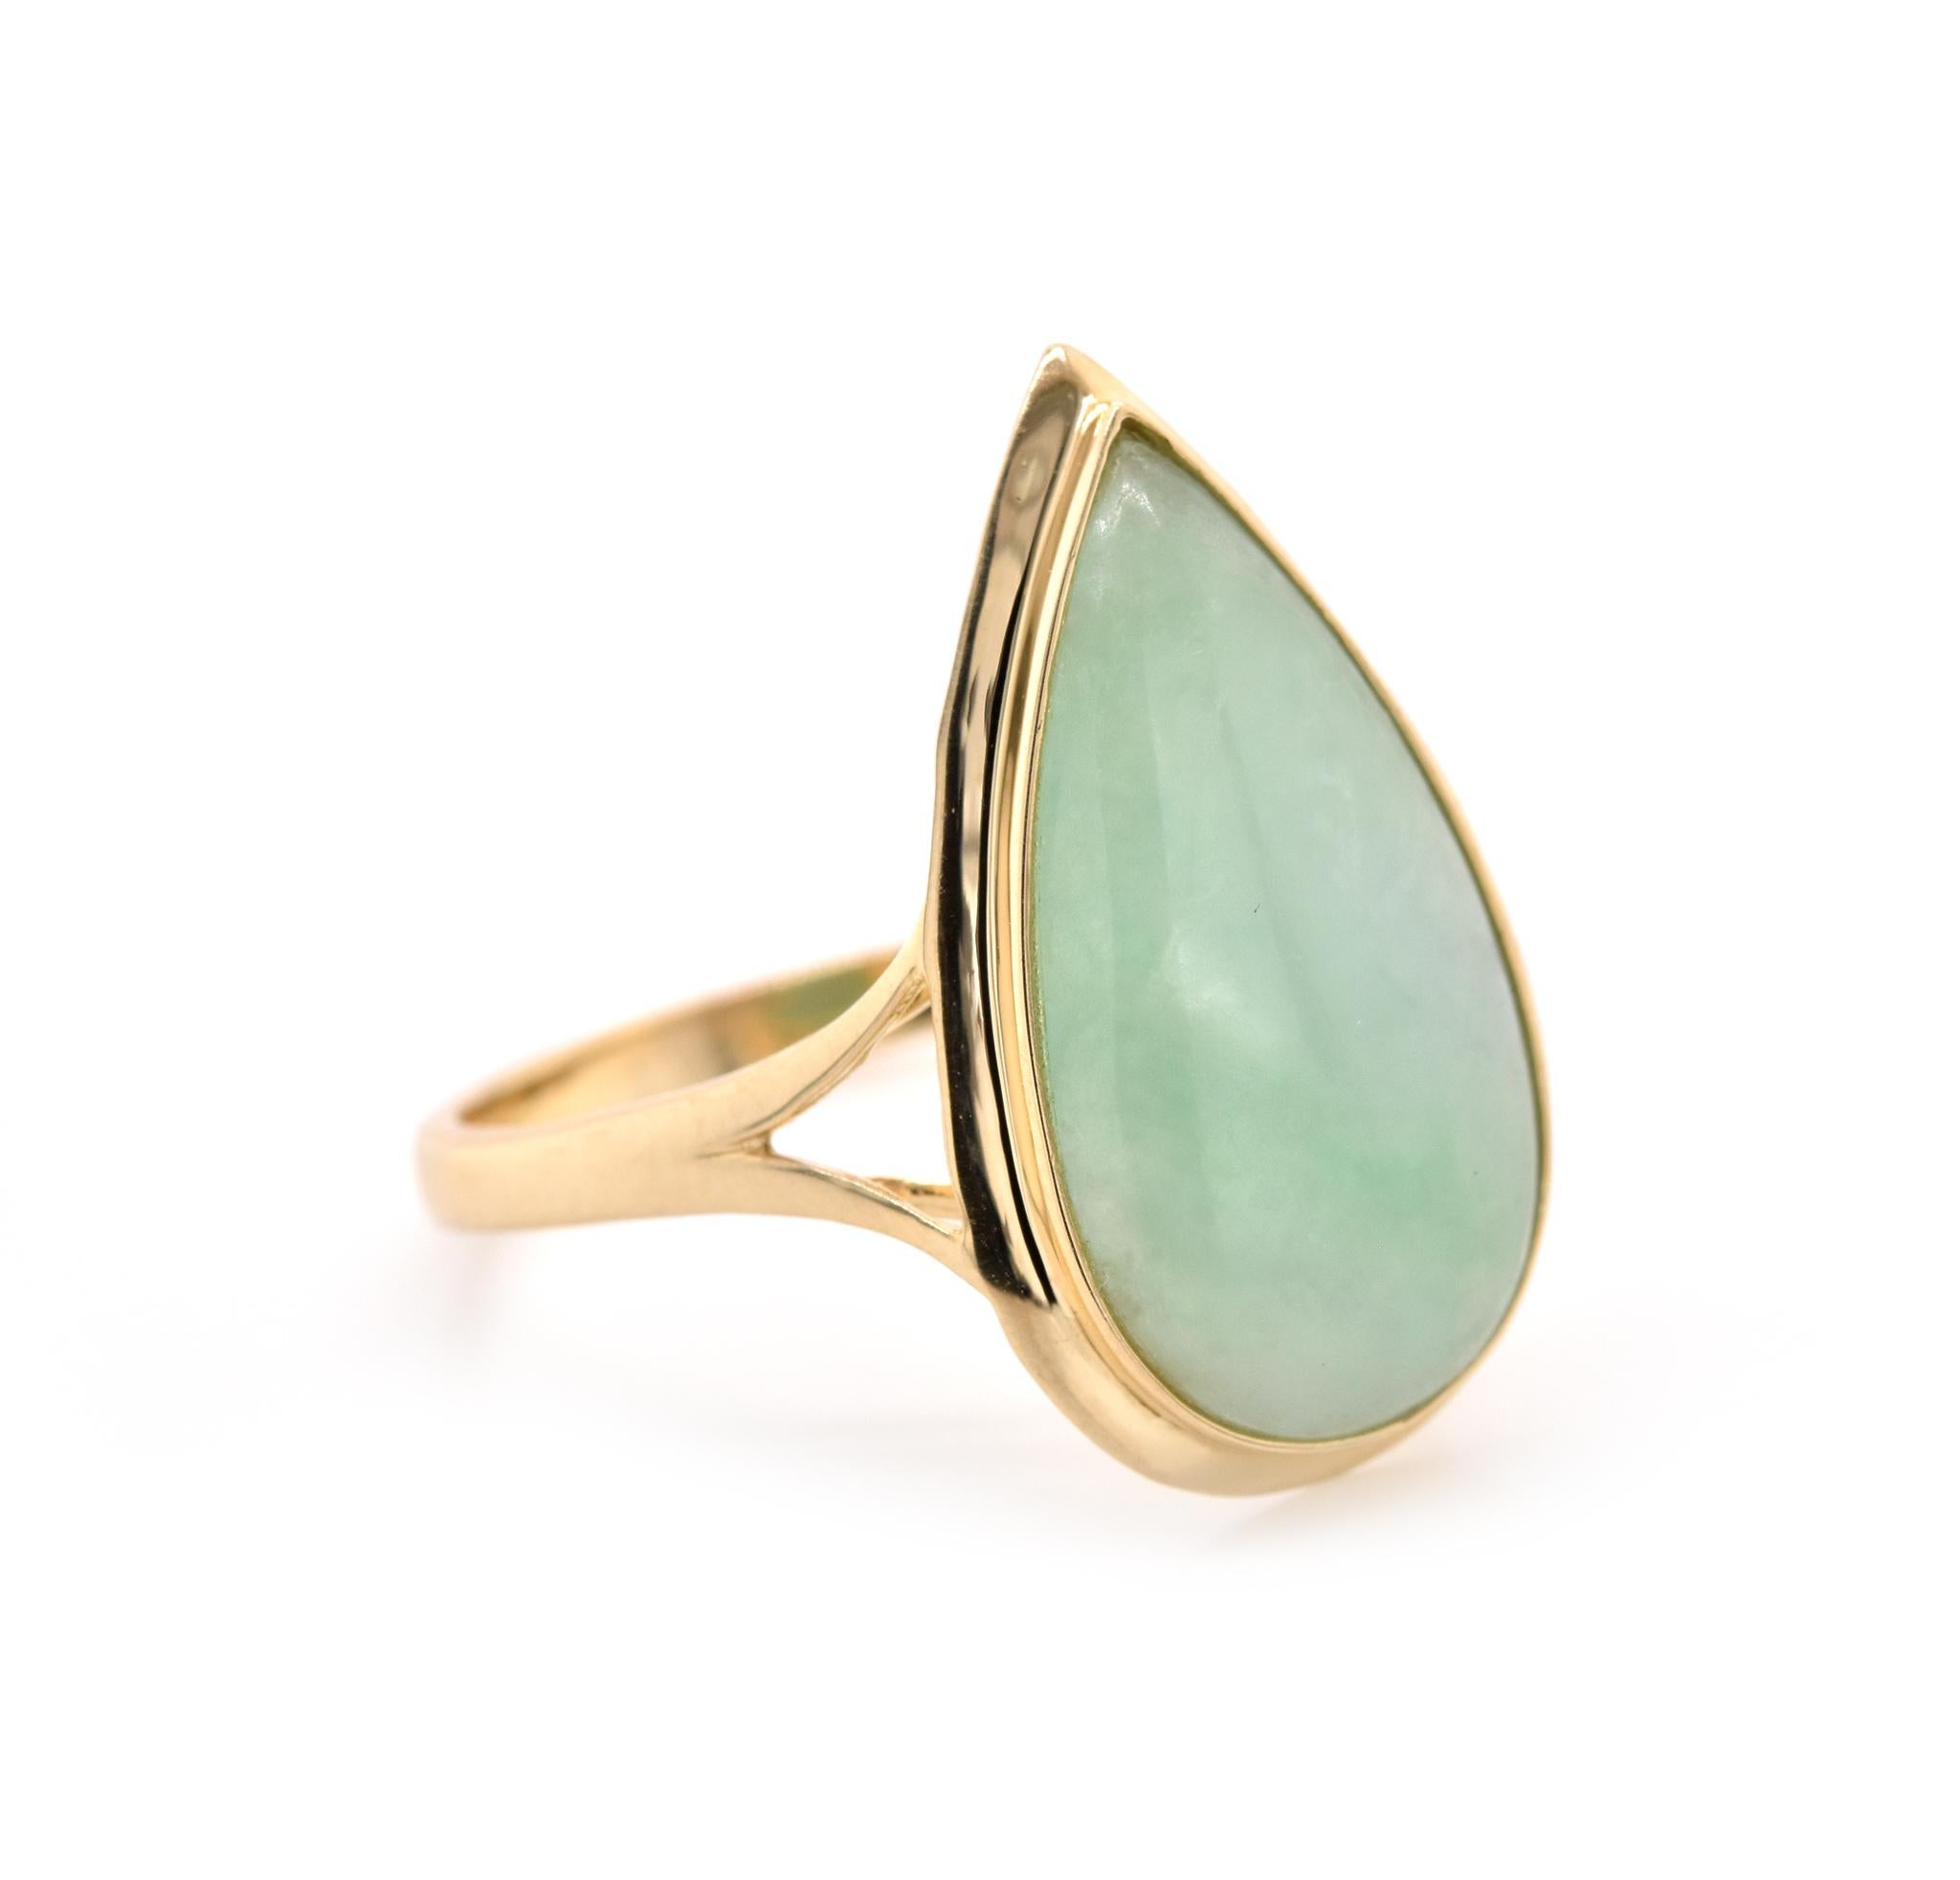 Designer: custom 
Material: 14K yellow gold
Gemstone: Jade = 3.94cttw pear cut
Ring Size: 9.25
Dimensions: ring is 2.2mm wide
Weight: 3.82 grams
